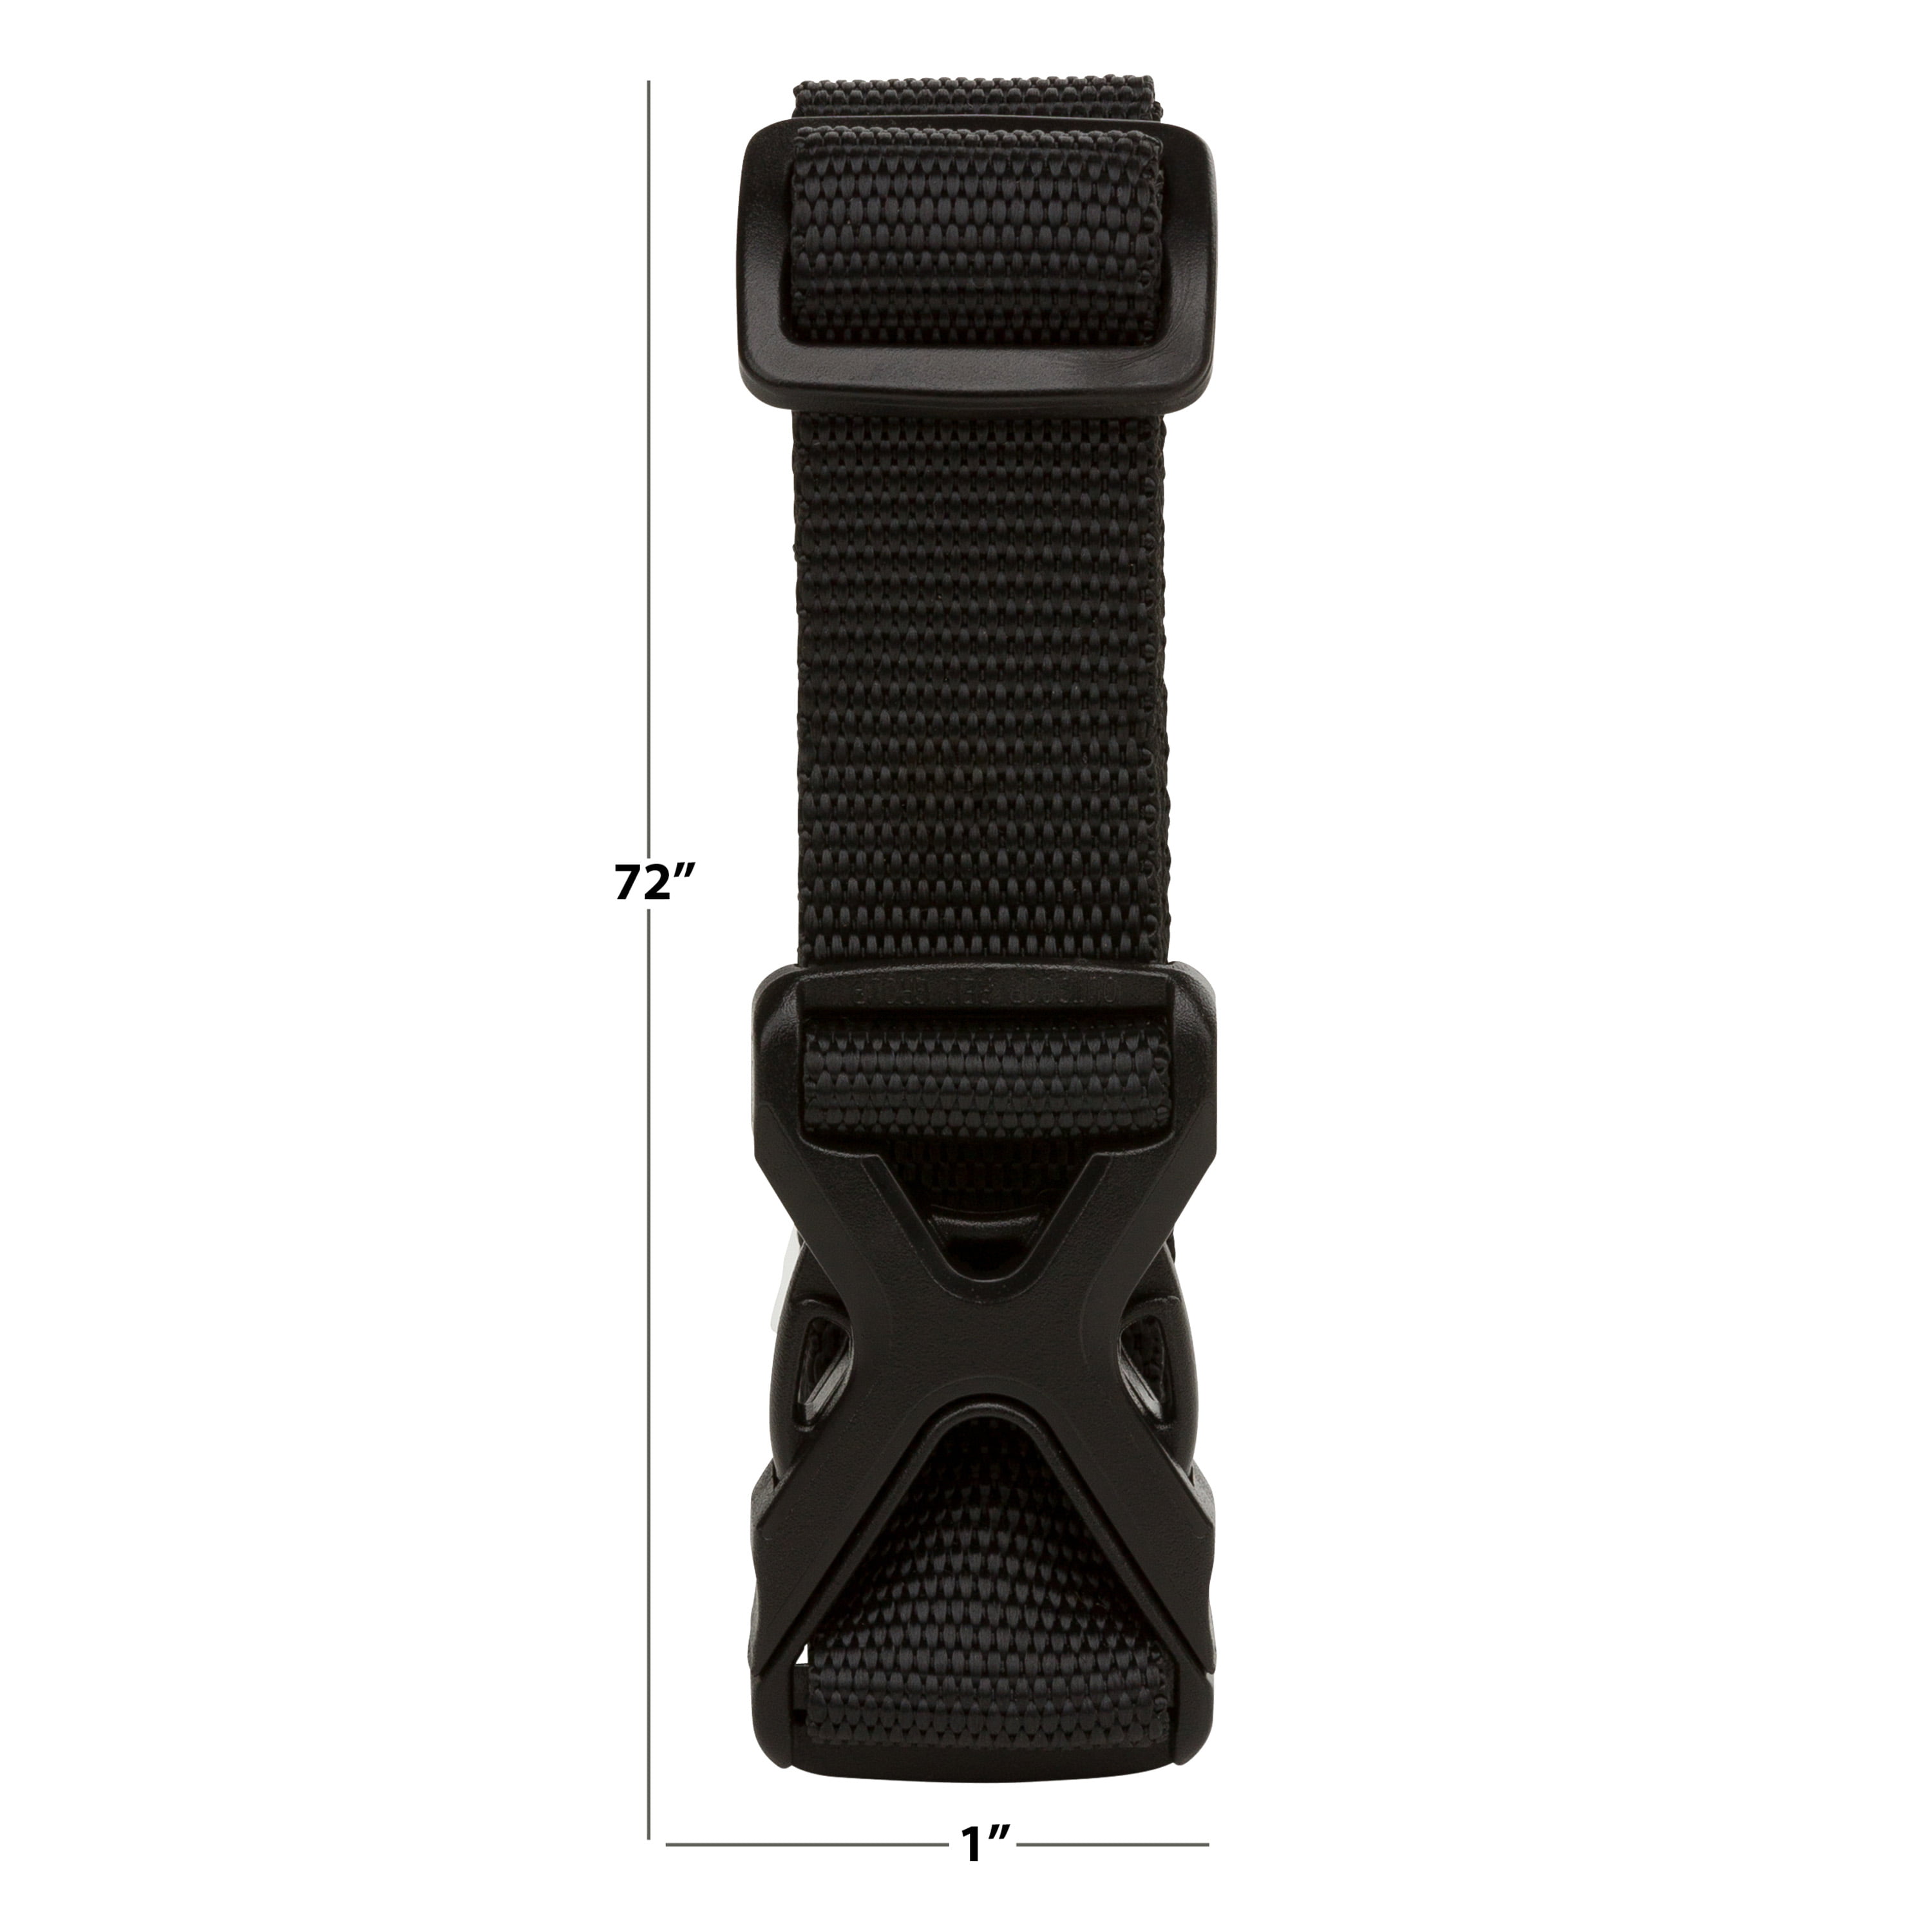 BKSR Your Length US Made Details about   1 Inch Lashing Strap NEW Tactical Black Webbing 